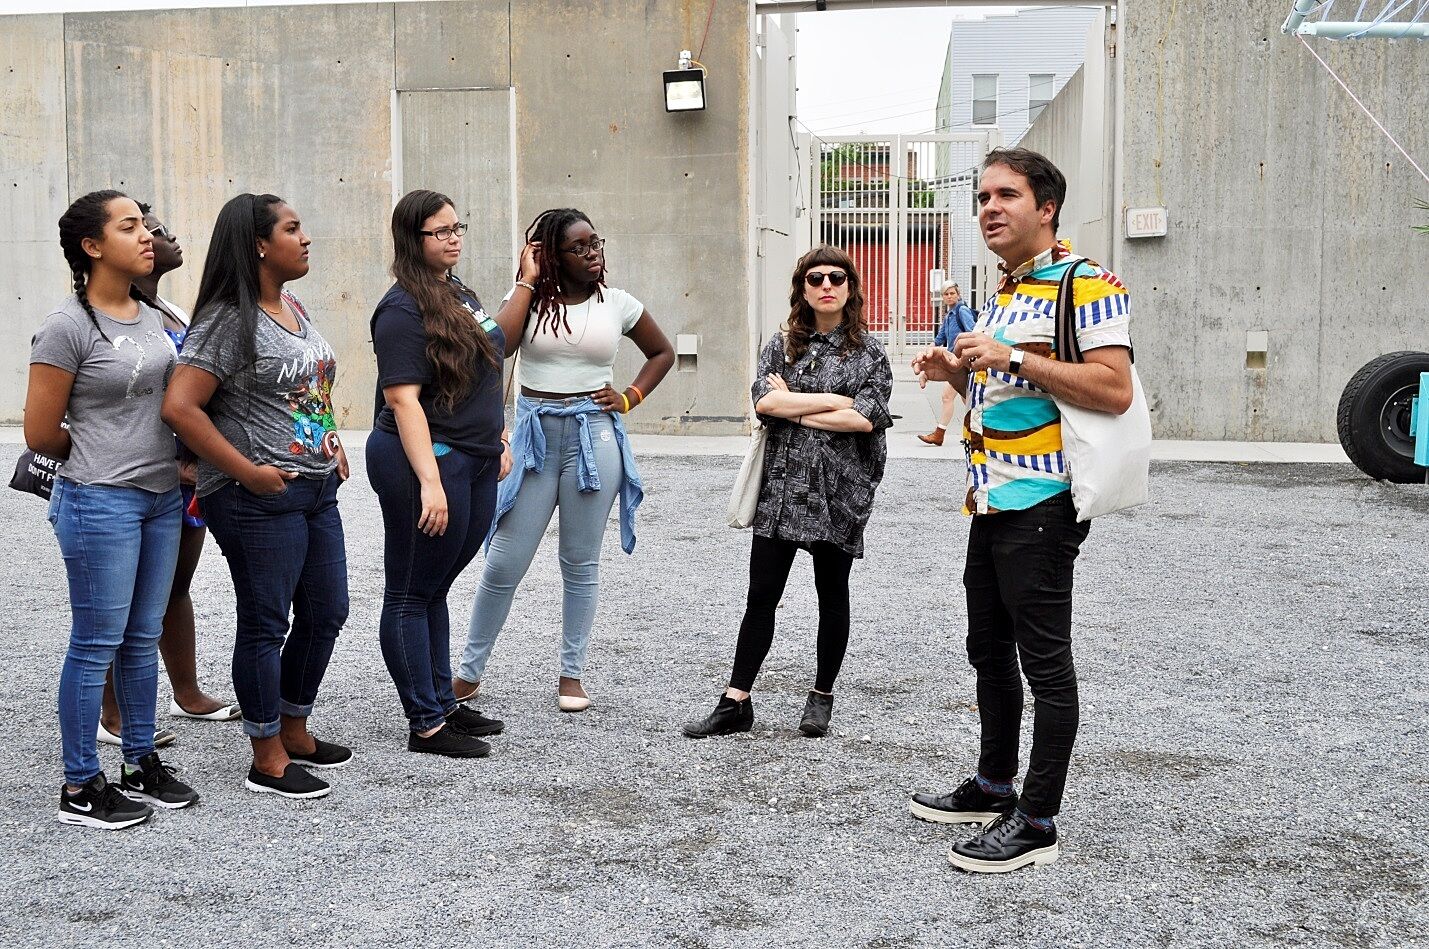 artist talks outside to group of teens